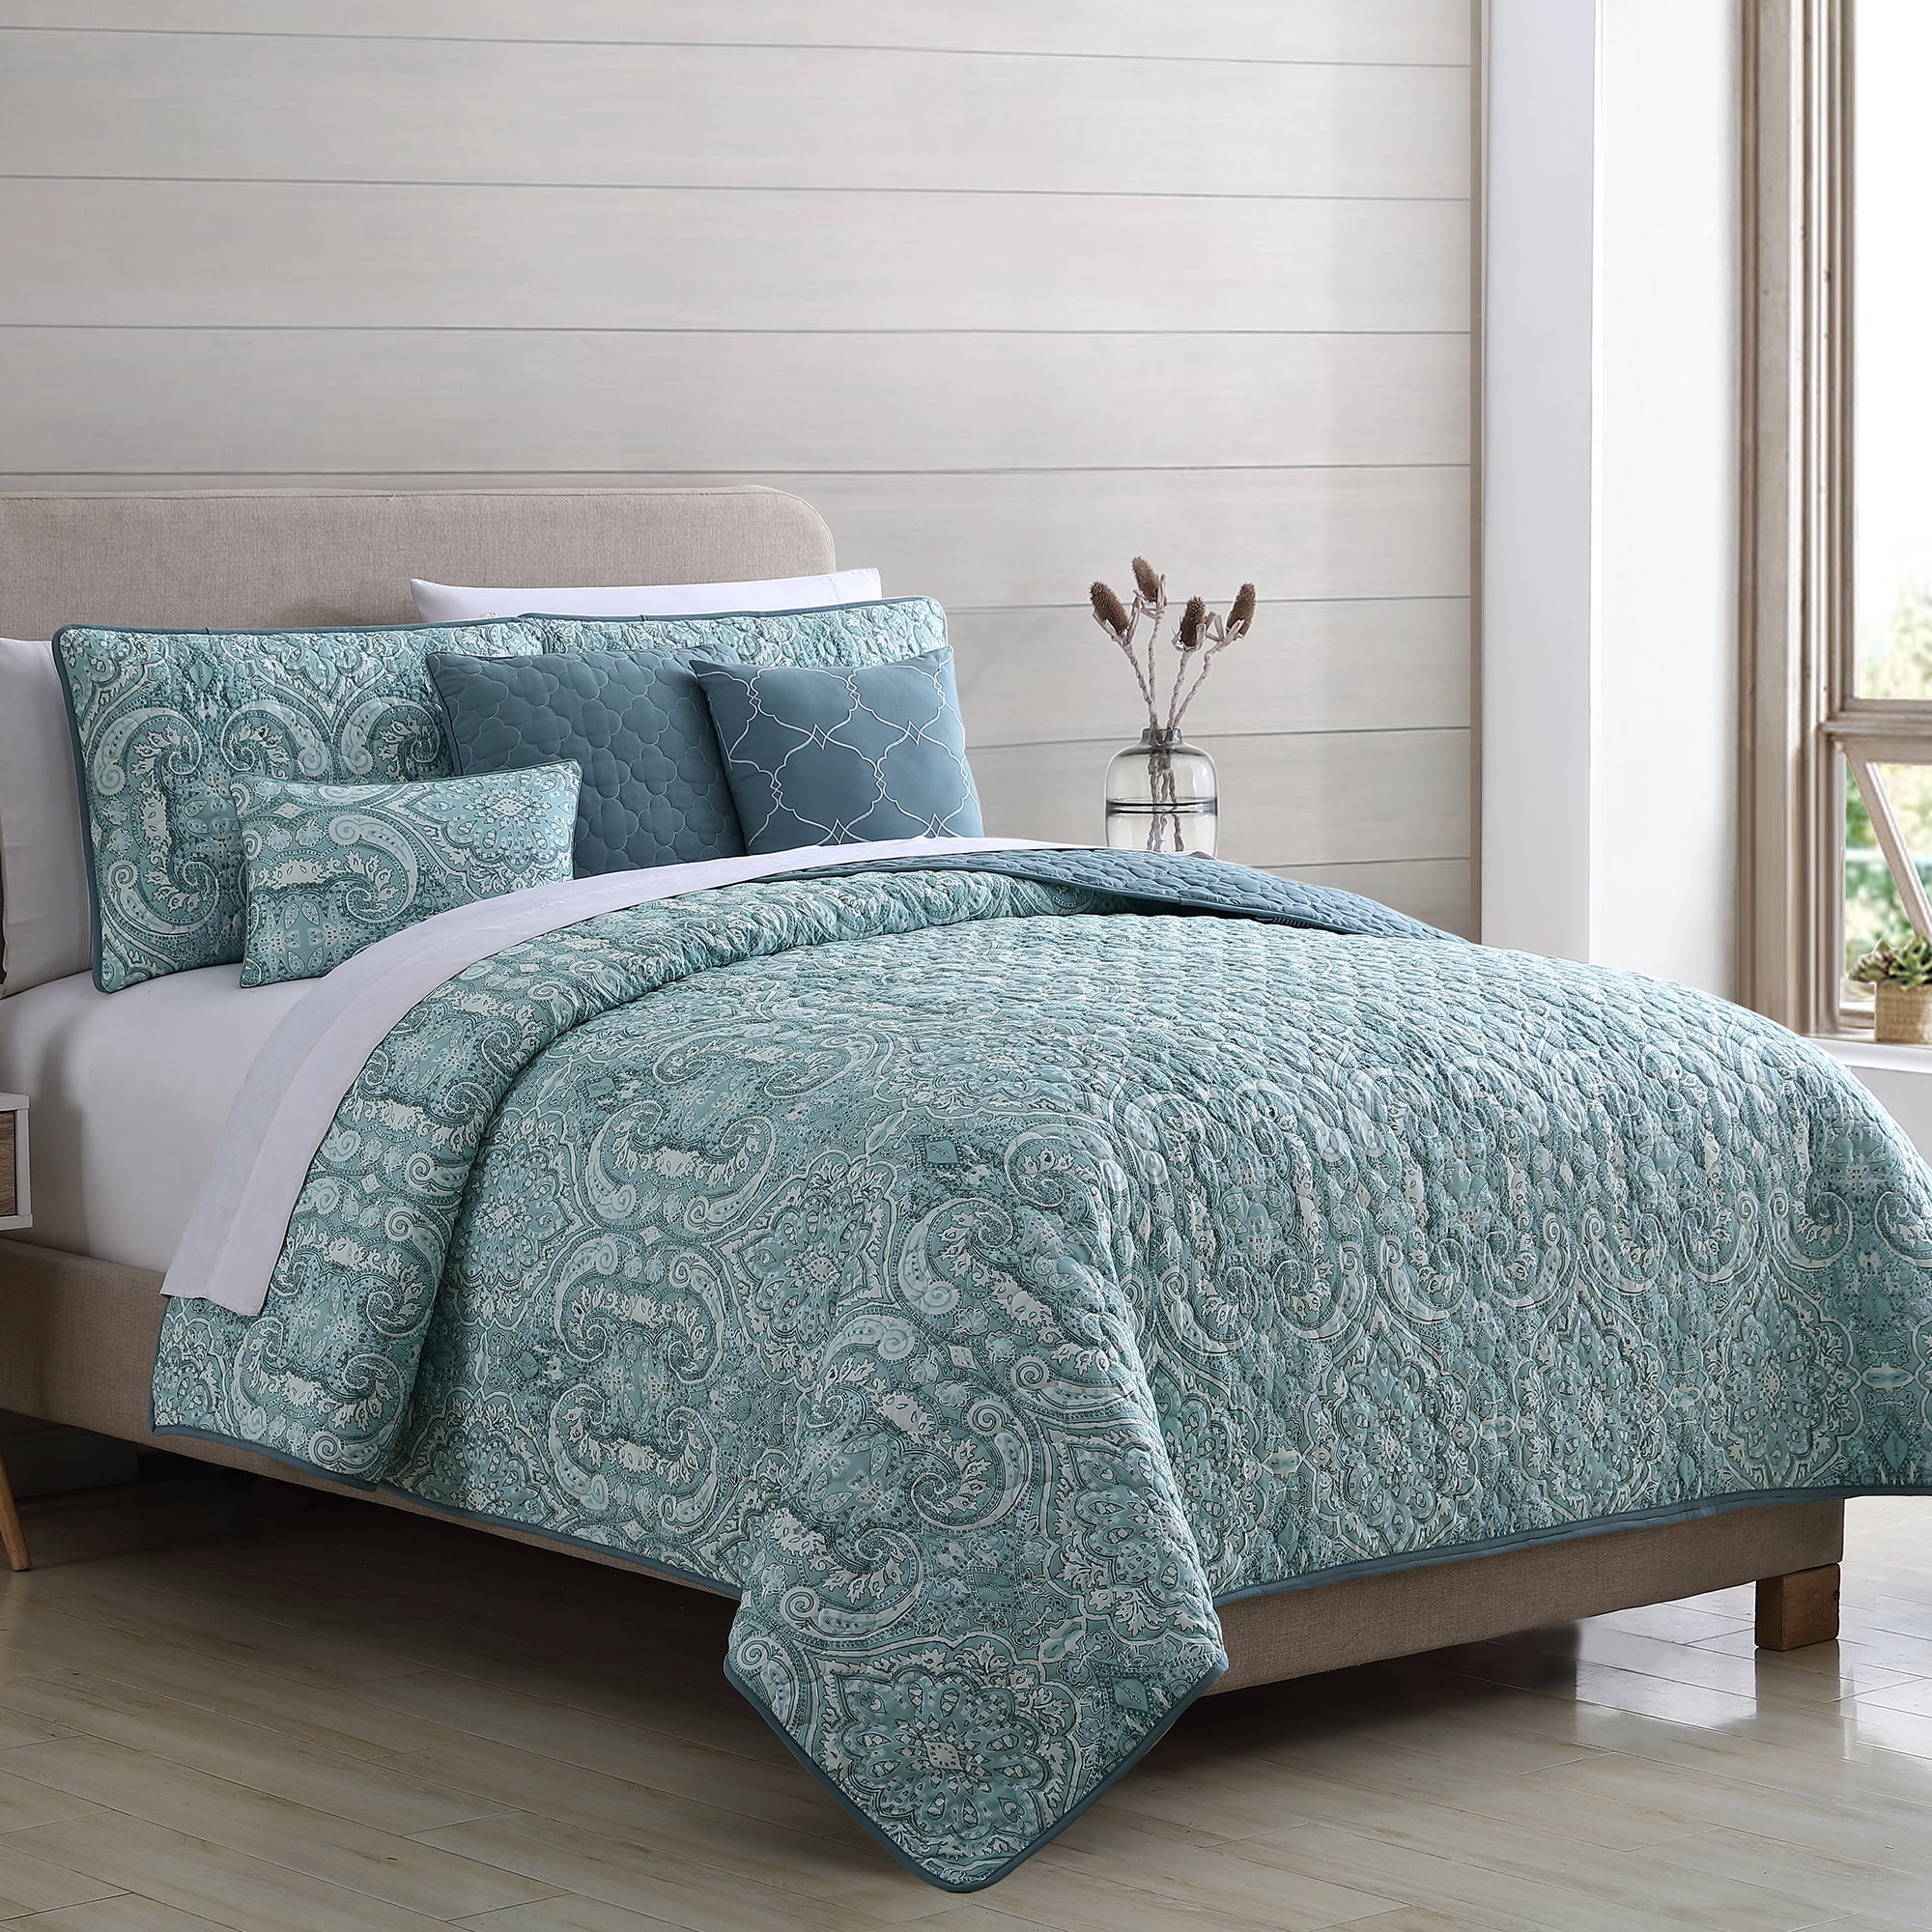 Modern 3 Piece Embroidered Quilted Bedspread Bed Throw Reversible Bedding Set 